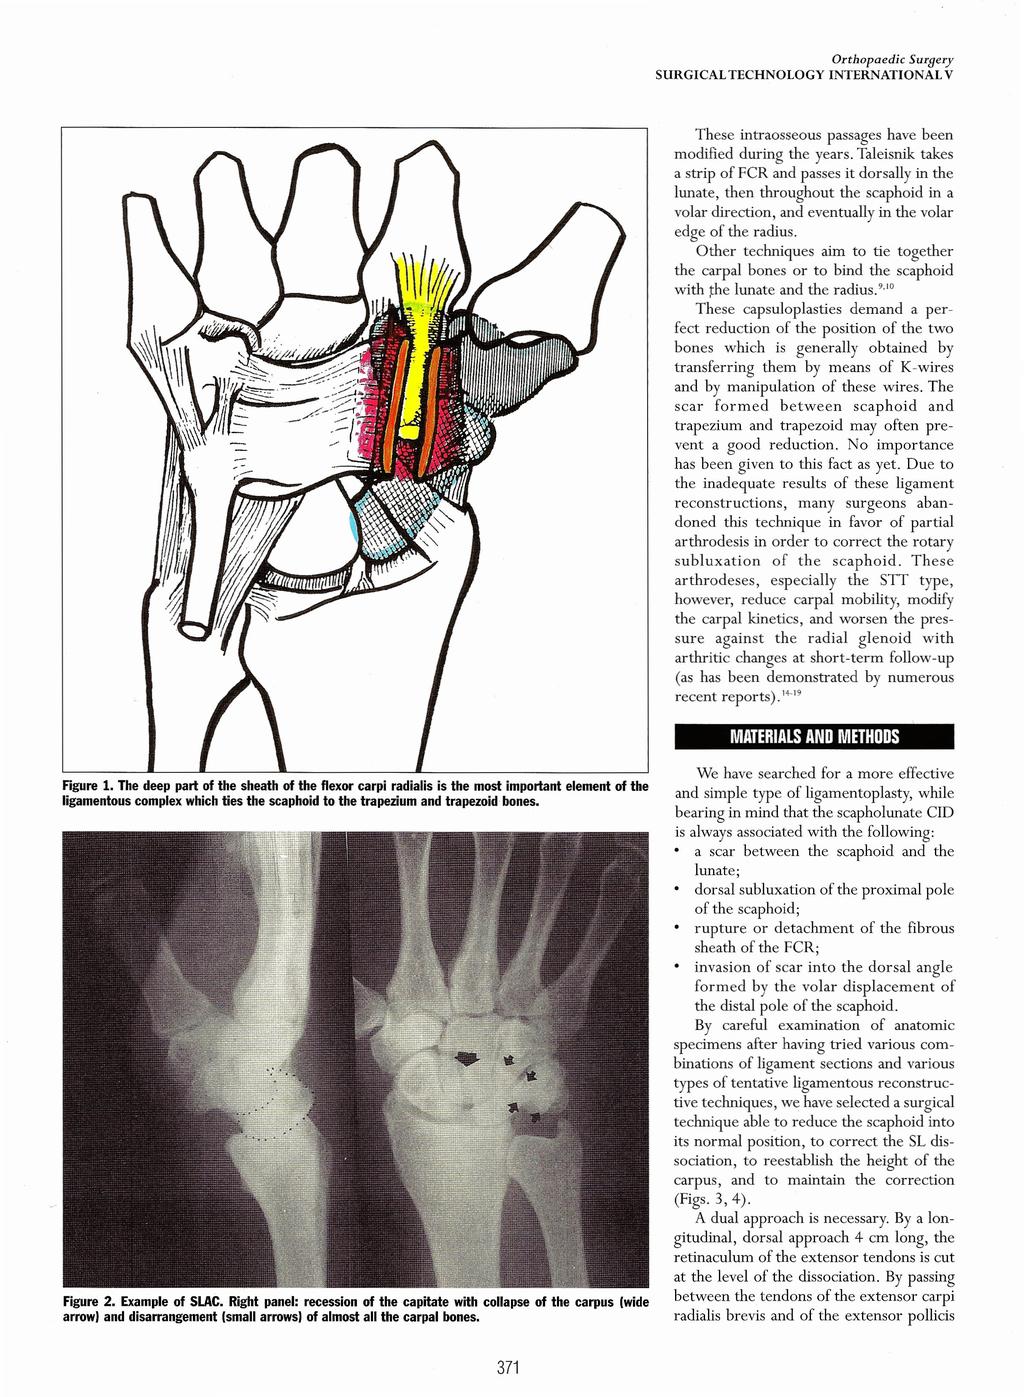 Orthopaedic SURGICAL TECHNOLOGY Surpery INTERNATIONAL V These intraosseous passages have been modified during the years.